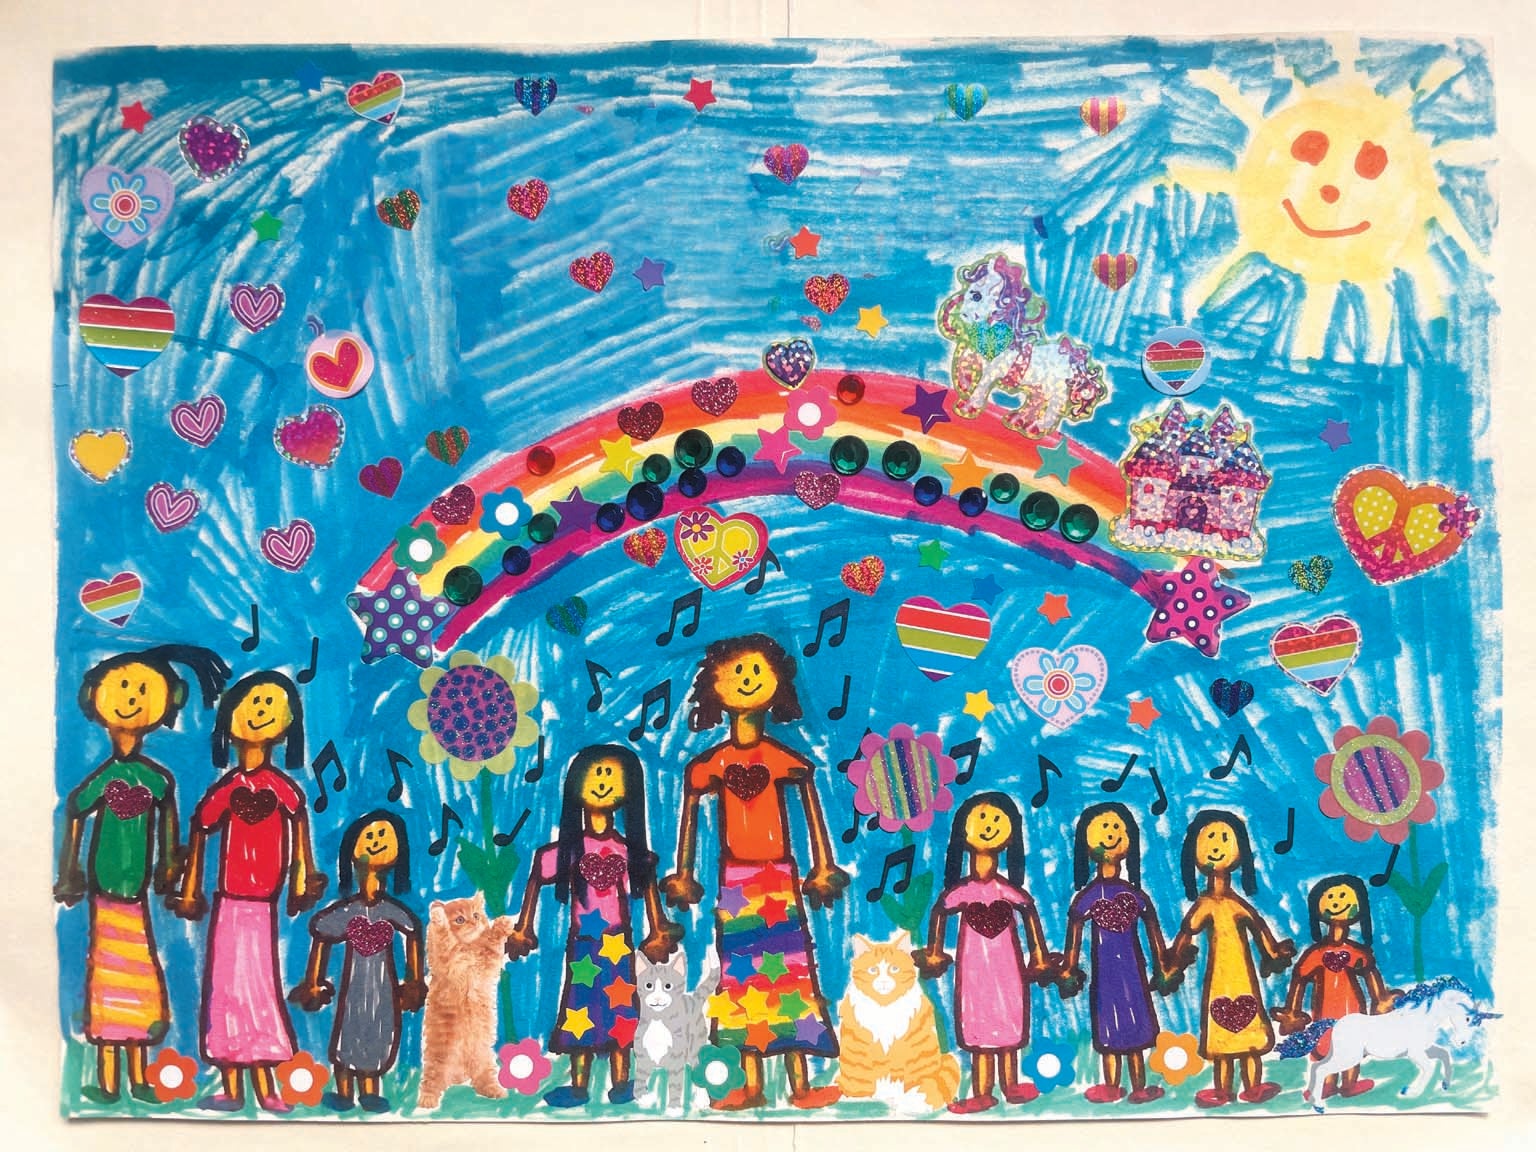 A colorful child’s drawing showing a group of people holding hand under a rainbow.